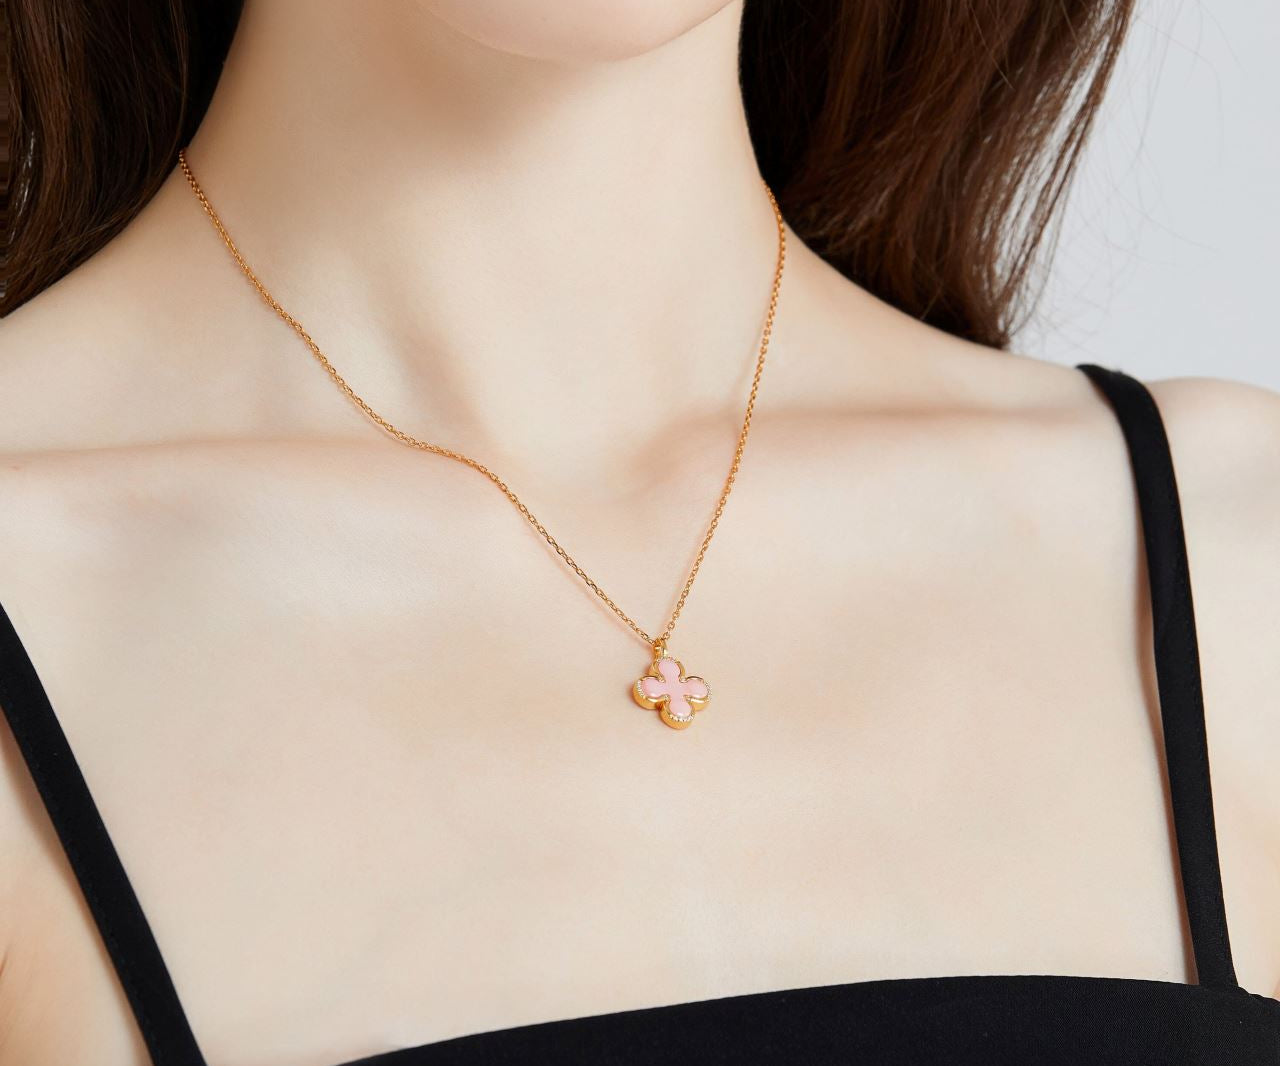 Pink Clover NecklaceHandcrafted Fine Jewelry